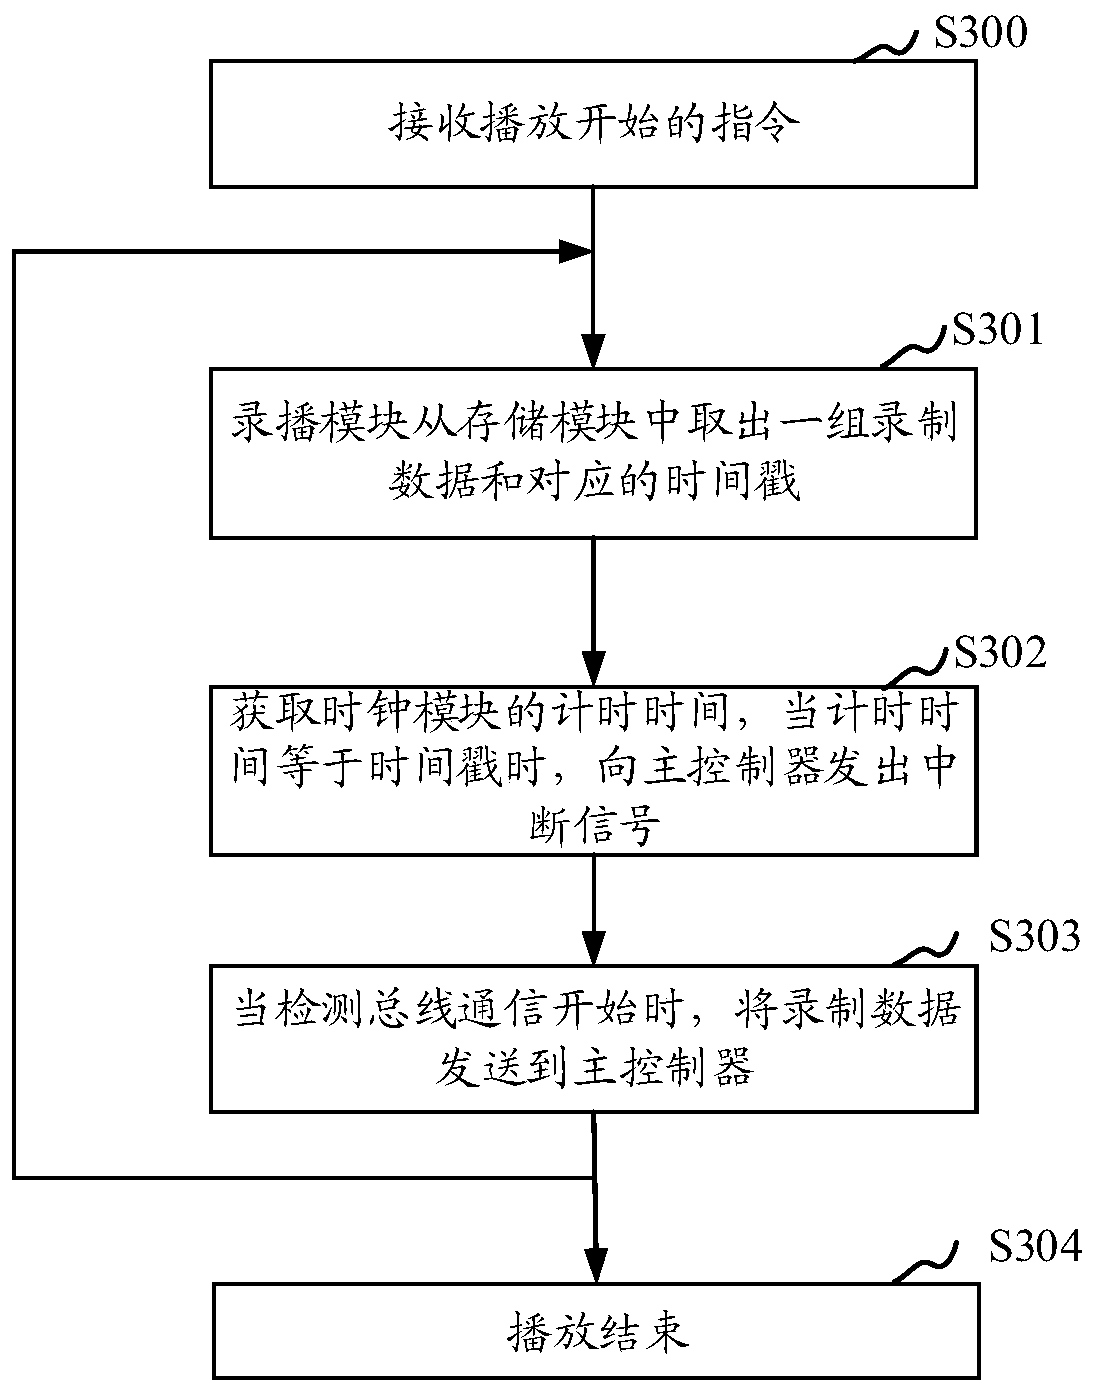 Touch screen operation recording and broadcasting system and method